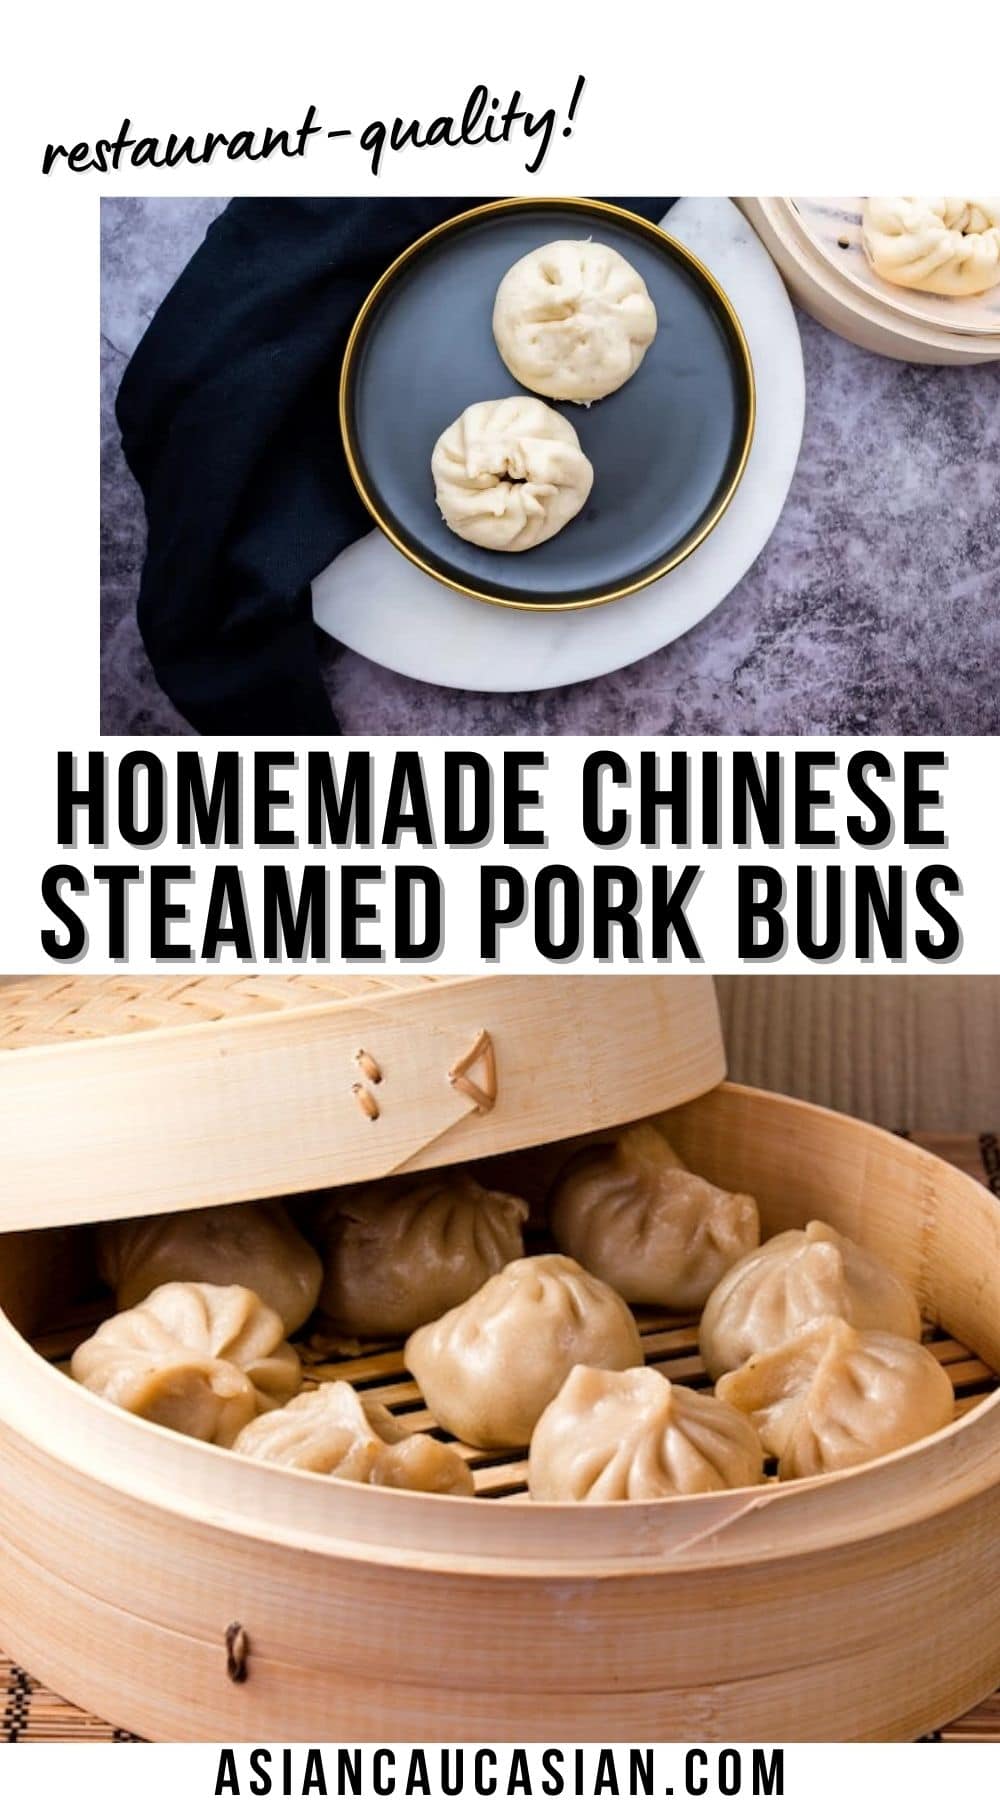 homemade Chinese steamed pork buns in a bamboo steamer and plated on a dark round plate.